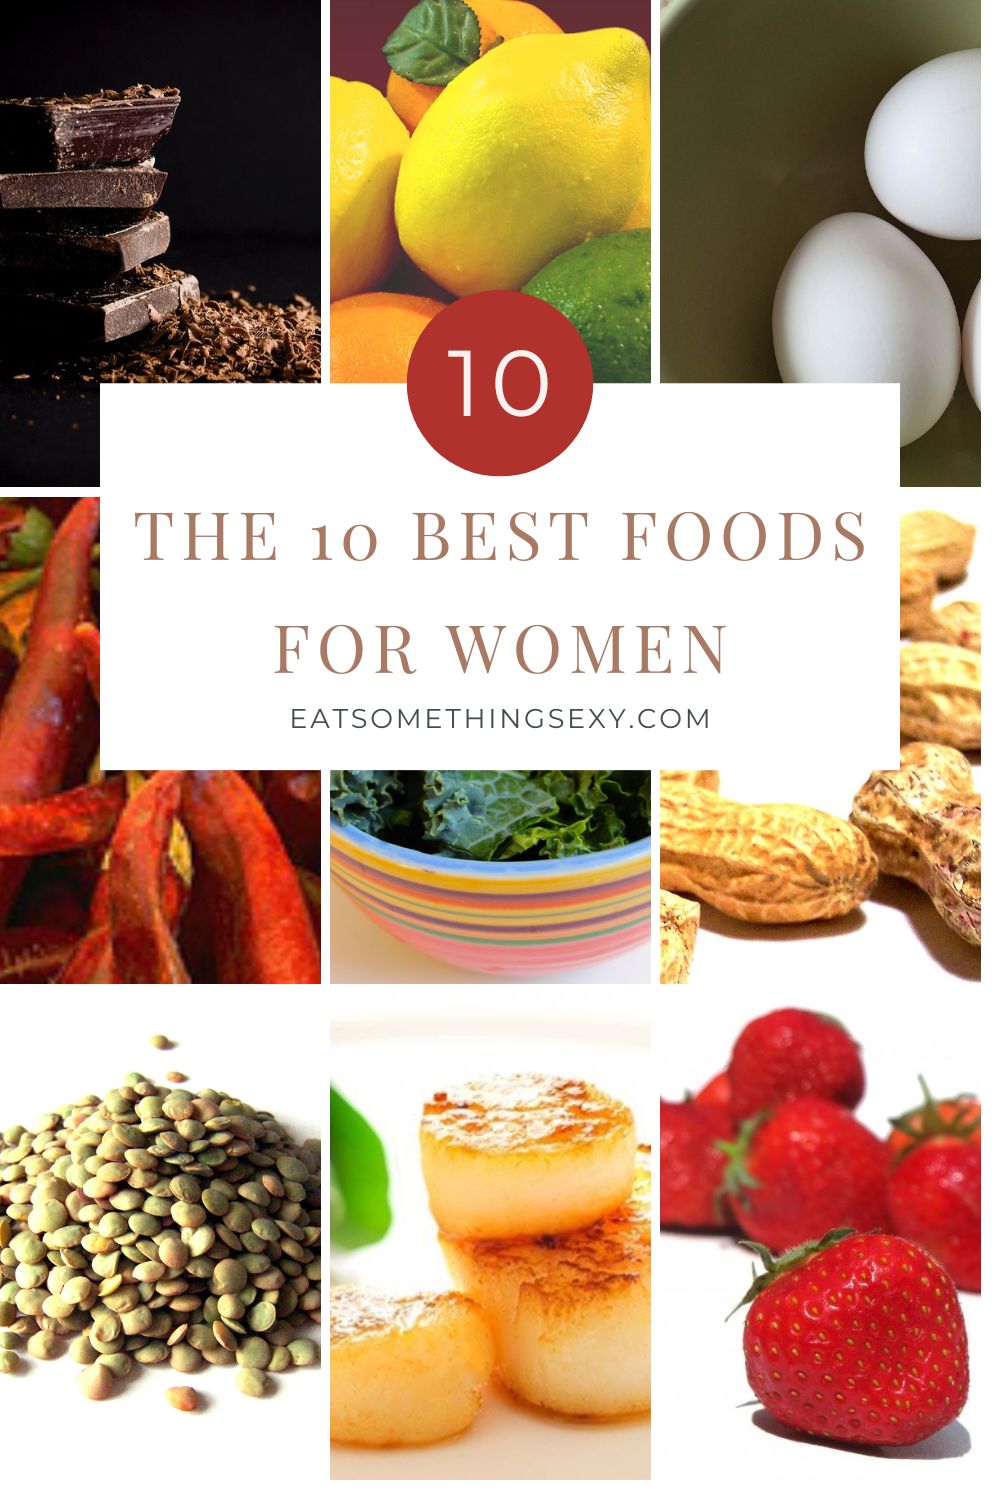 The 10 best foods for women graphic